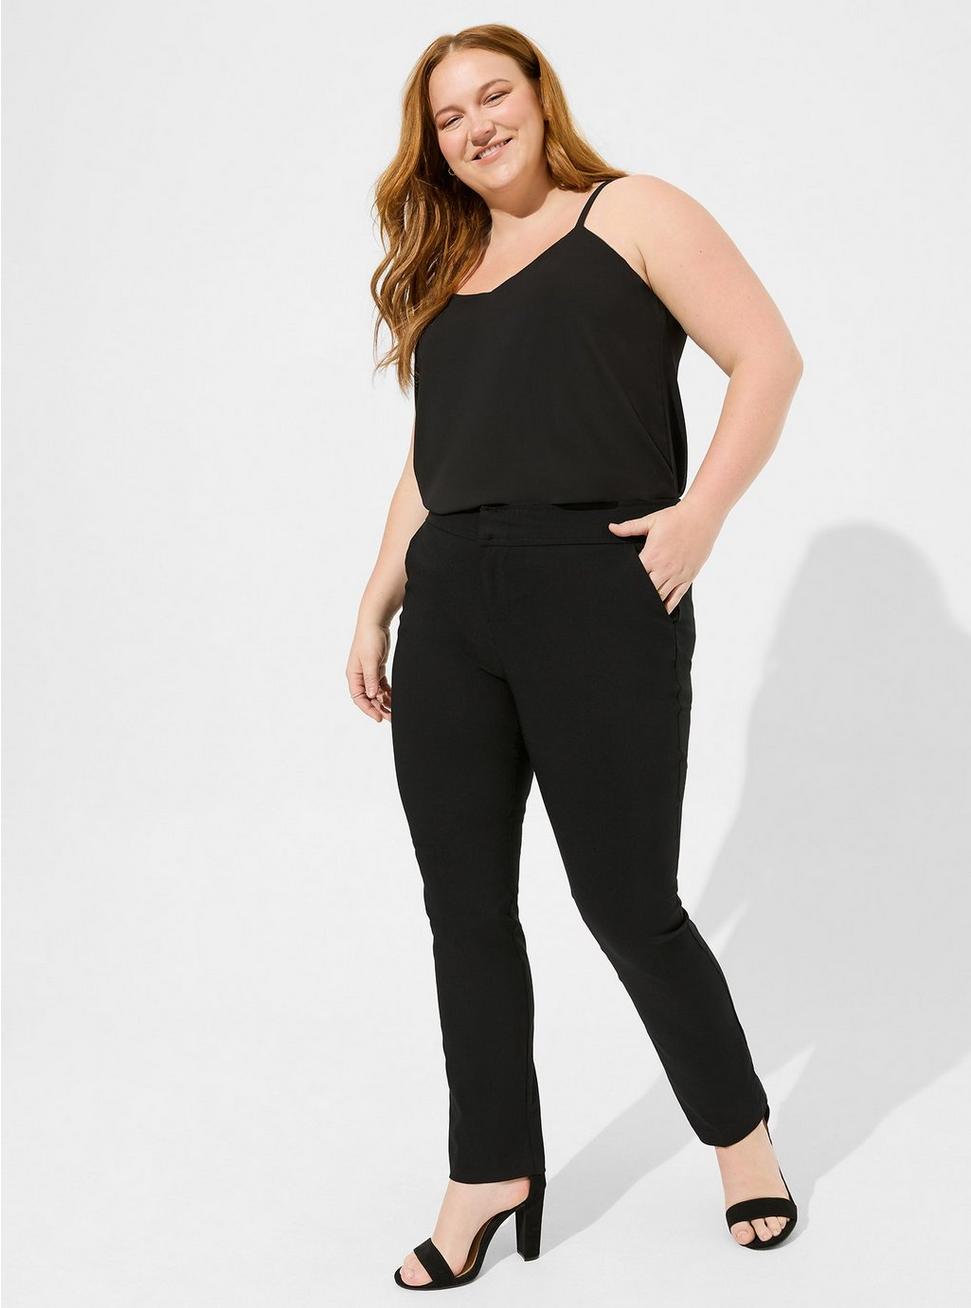 Trouser Straight Deluxe Stretch Mid-Rise Pant, DEEP BLACK, hi-res